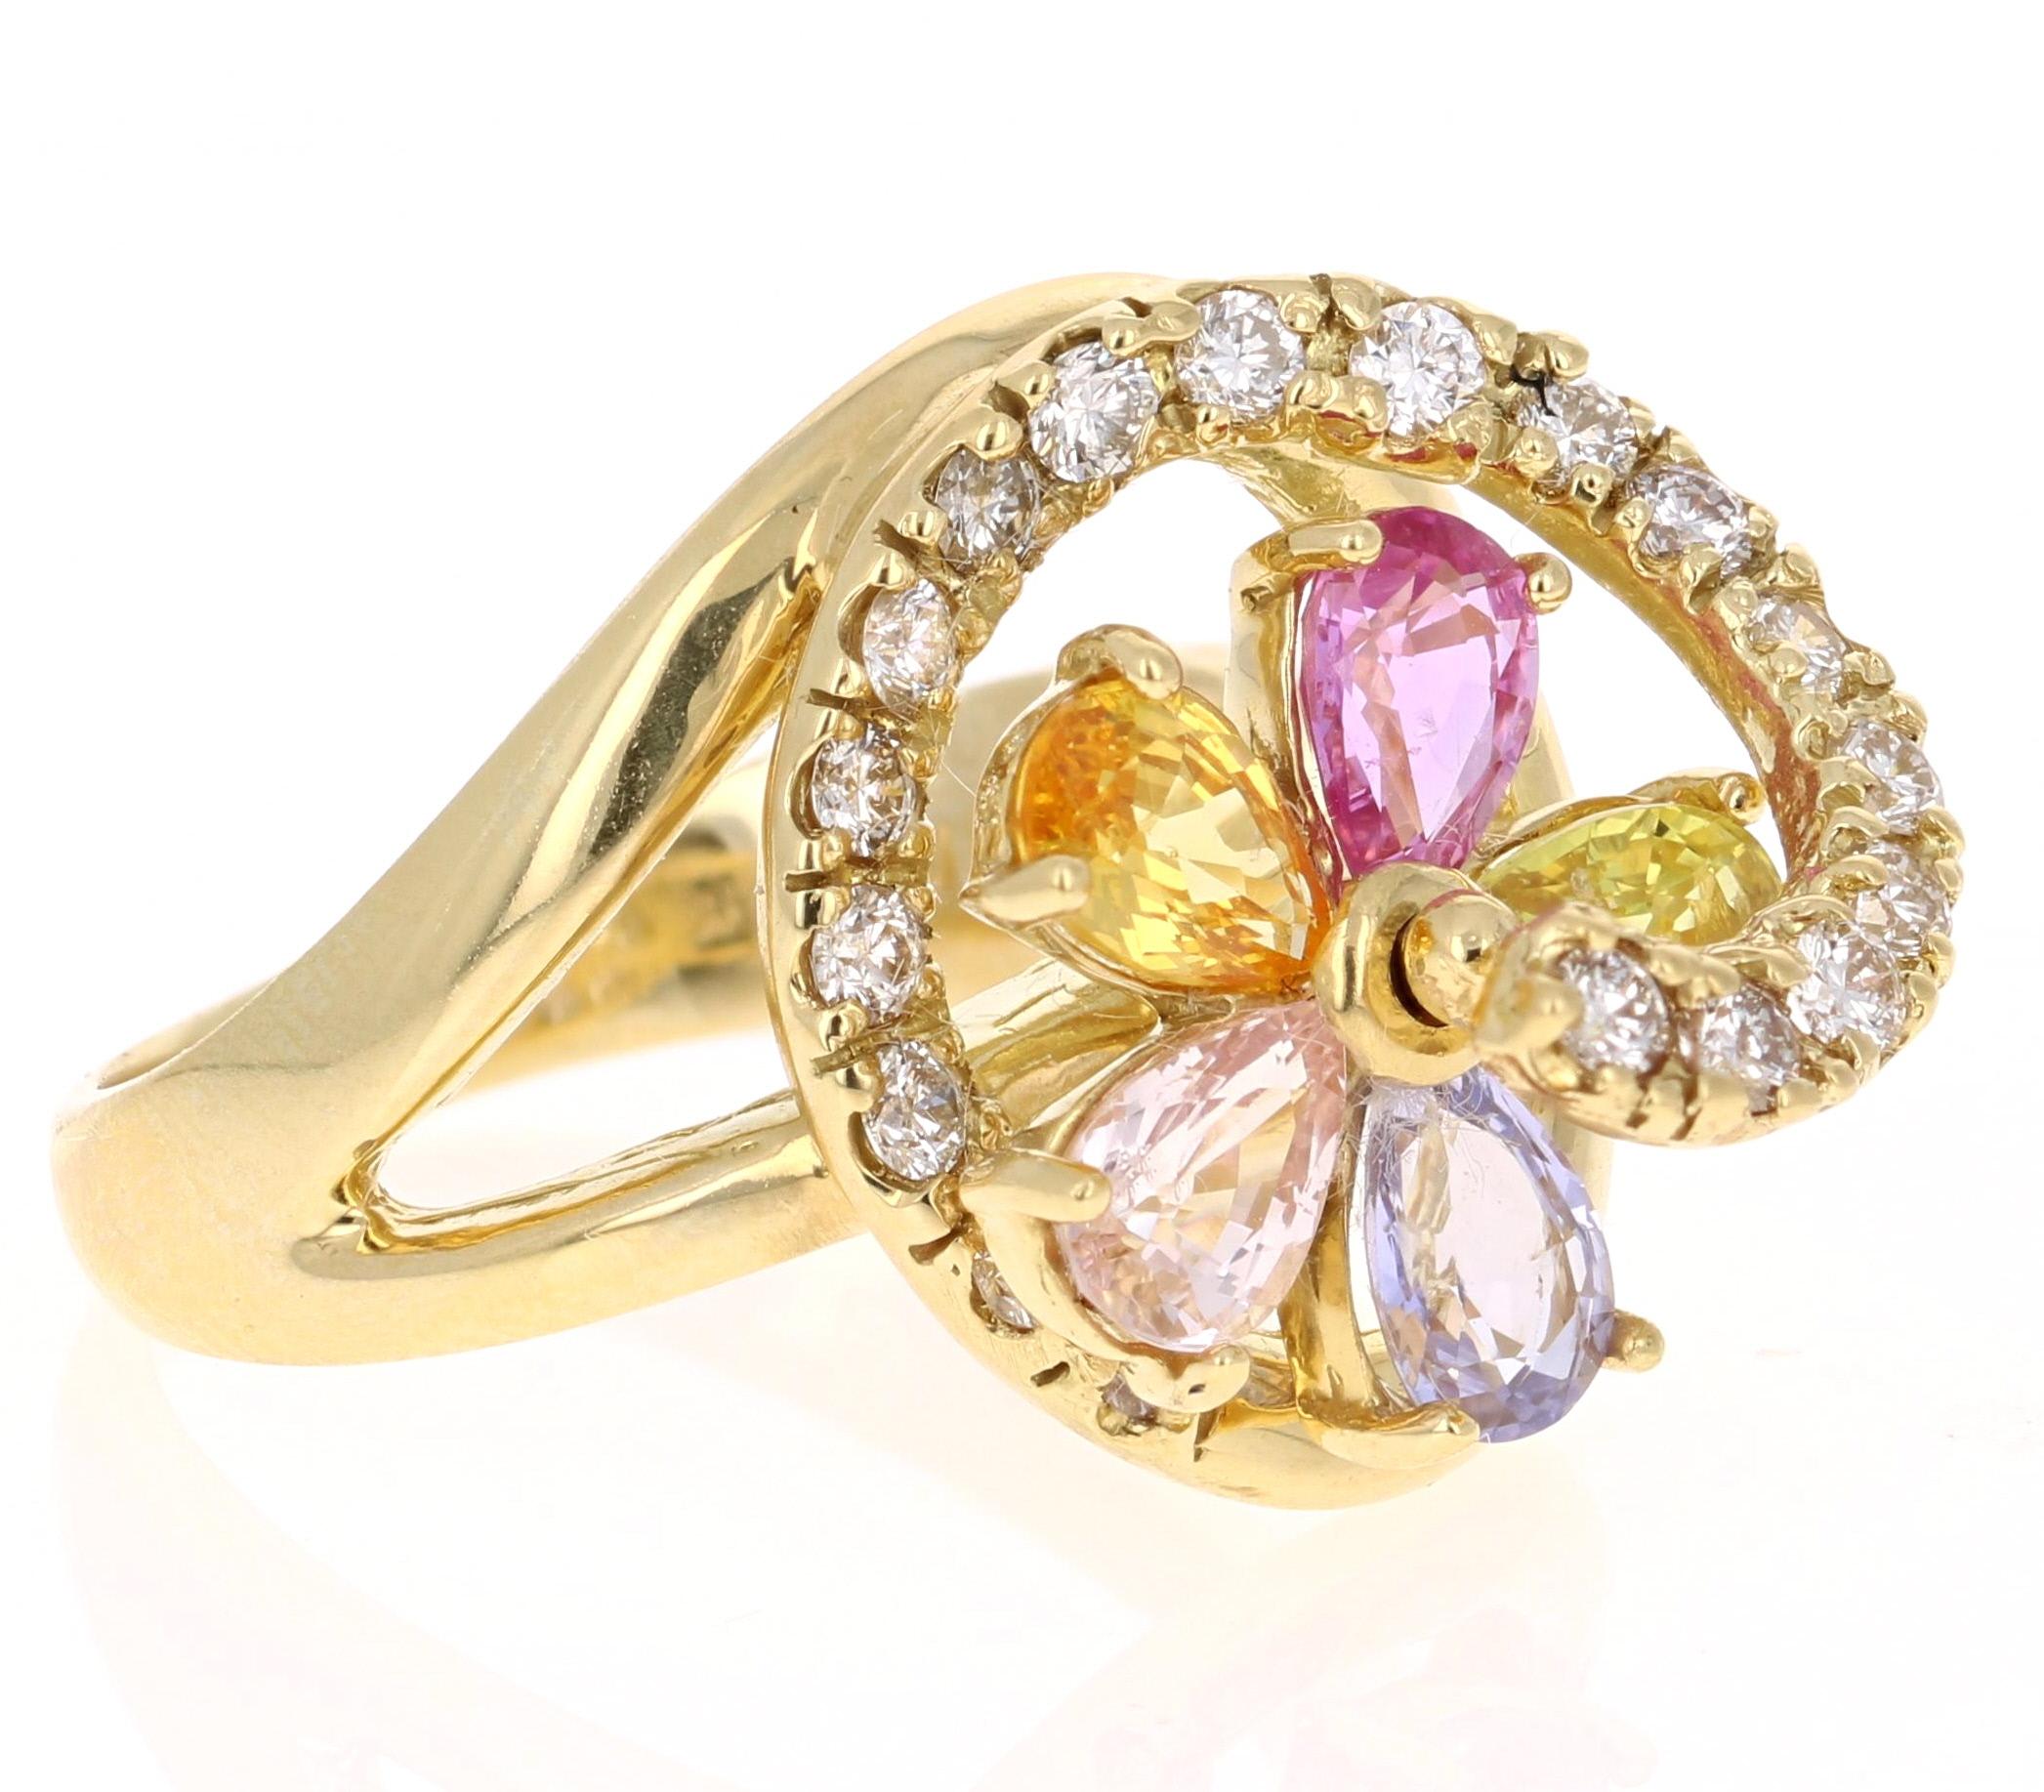 Super gorgeous and uniquely designed 3.12 Carat Multi-Colored Sapphire and Diamond 14K Yellow Gold Cocktail Ring!

This ring has 5 Pear Cut Multi-Colored Sapphires that weigh 2.59 carats.  The Multi-colored Sapphires are set in a flower petal like